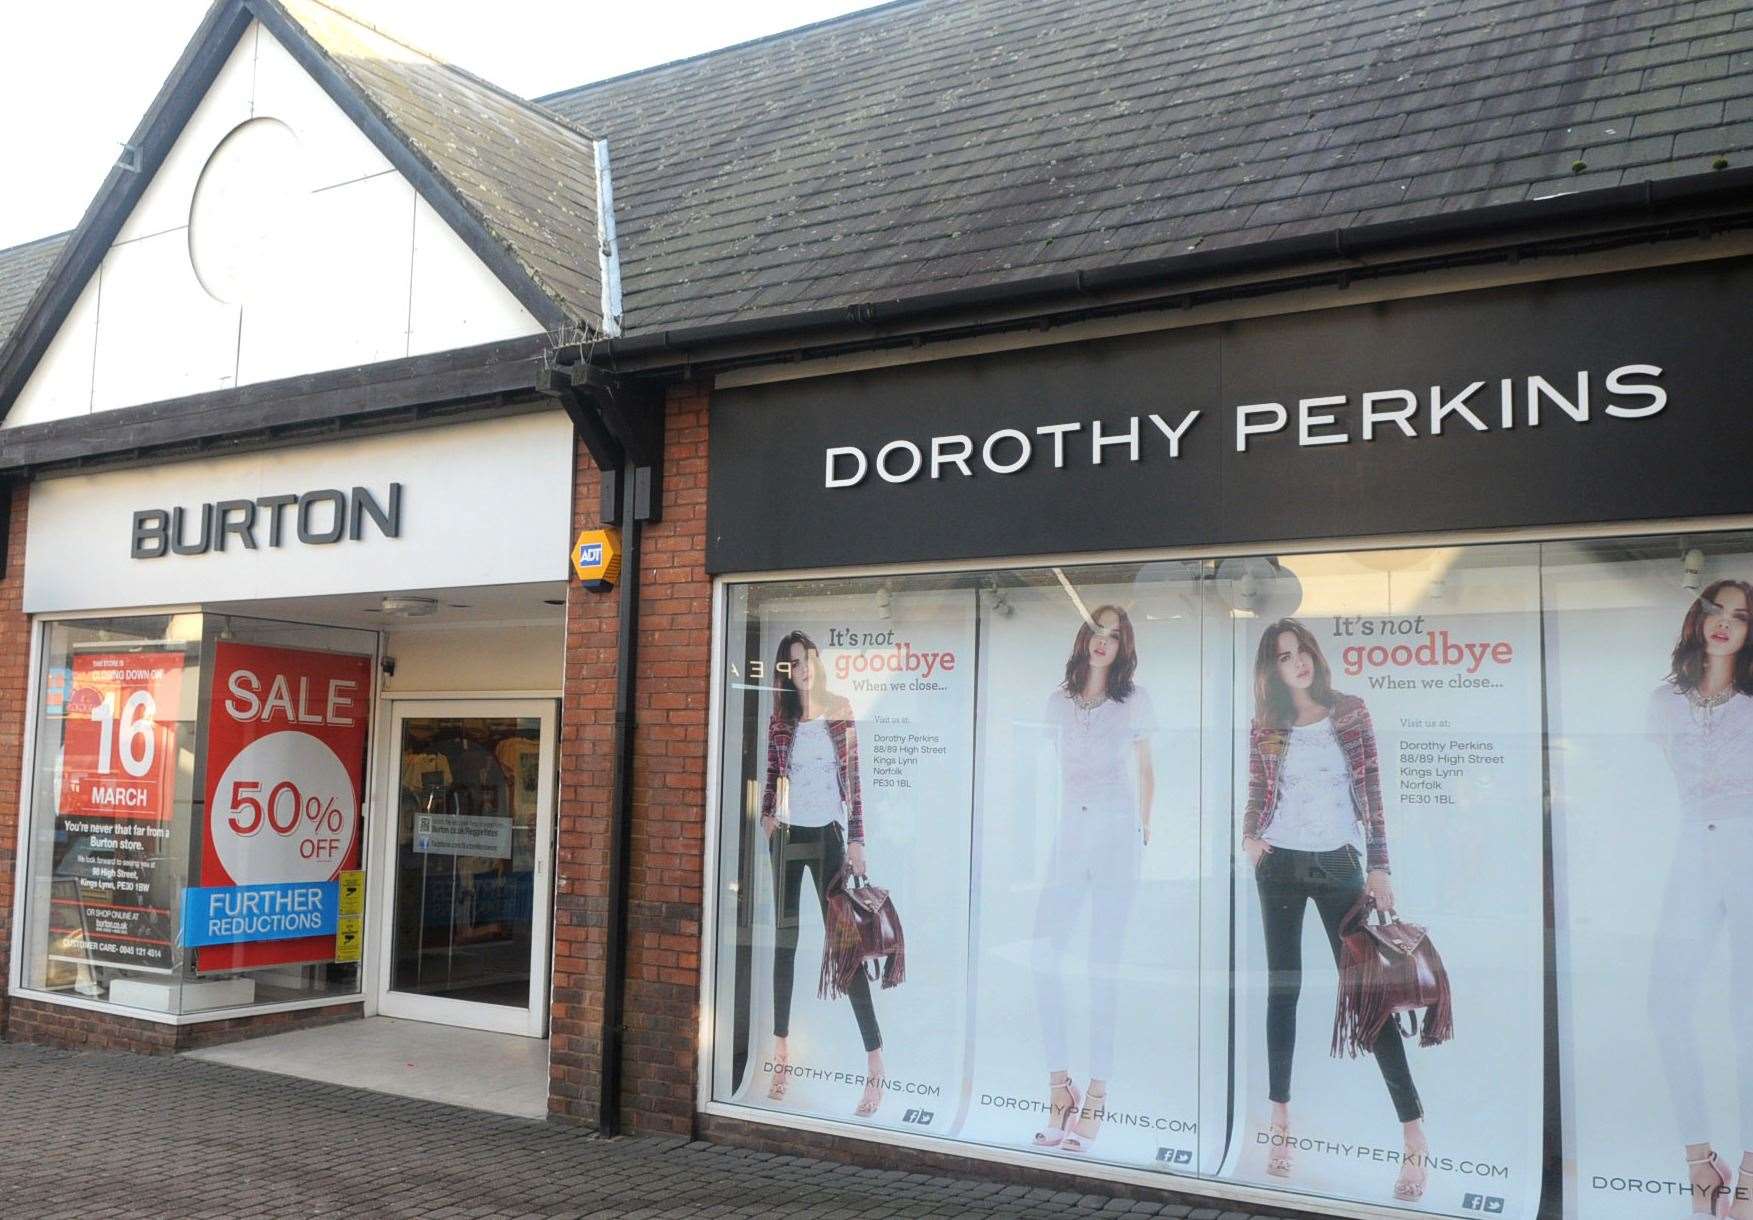 Burton and Dorothy Perkins are part of the group's fashion empire